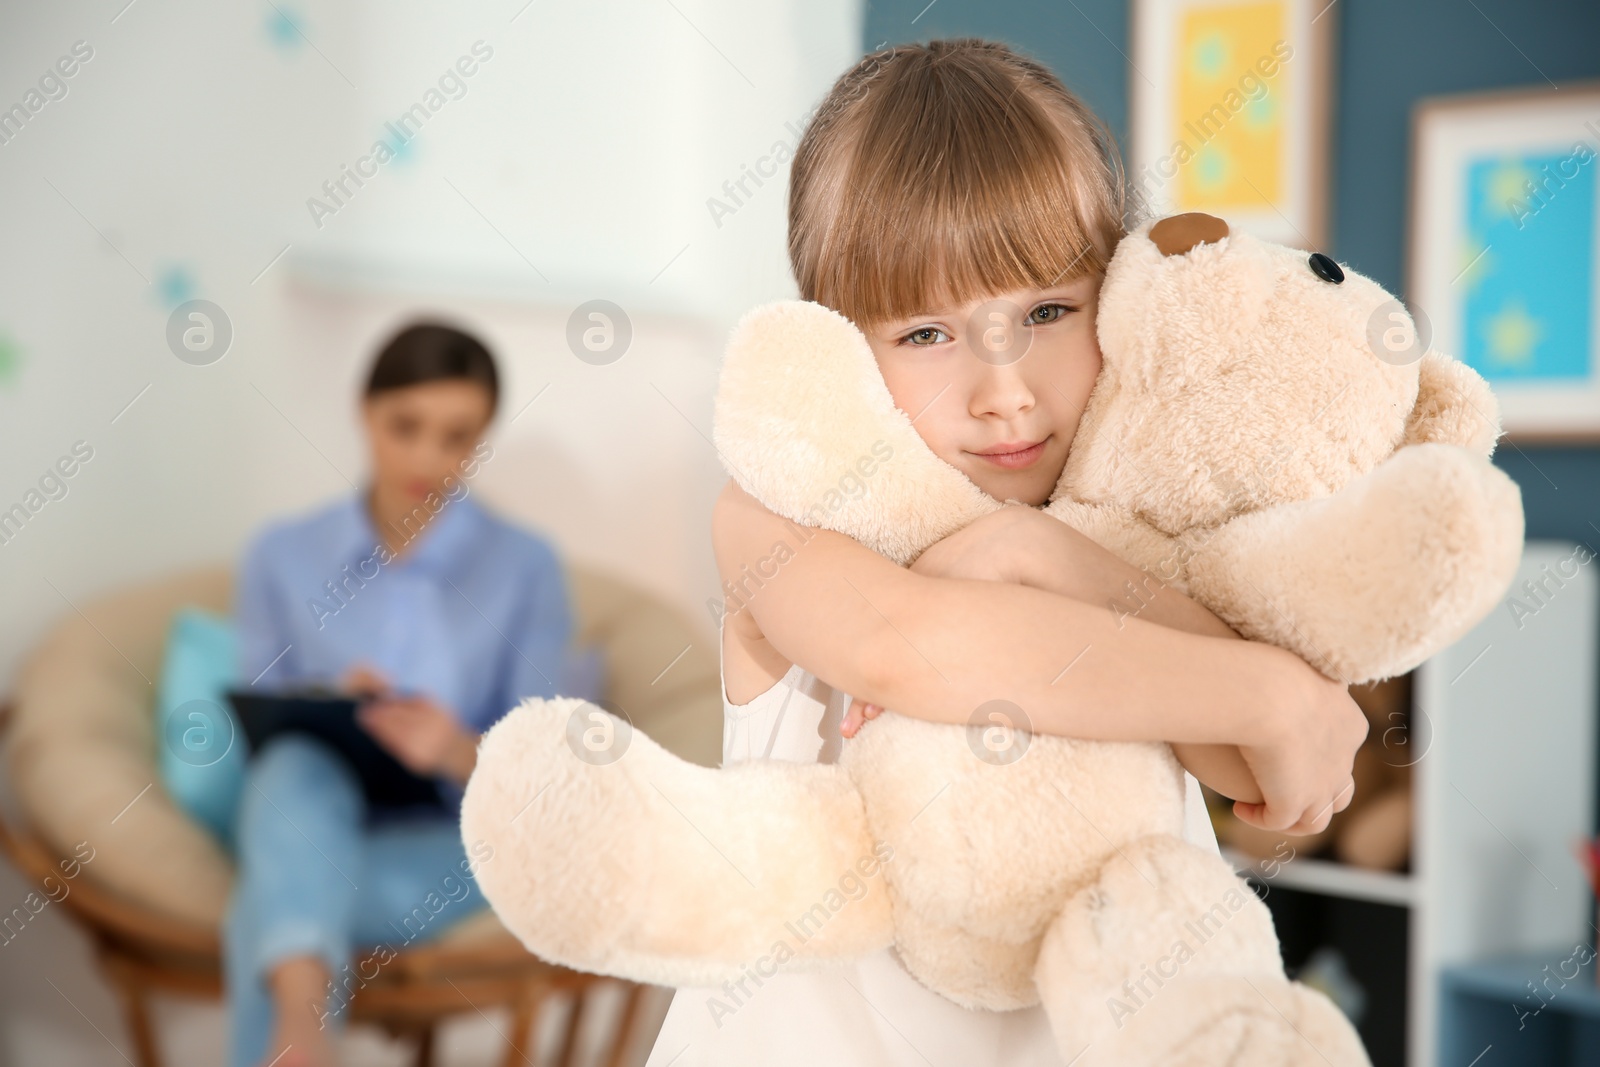 Photo of Sad little girl at child psychologist's office